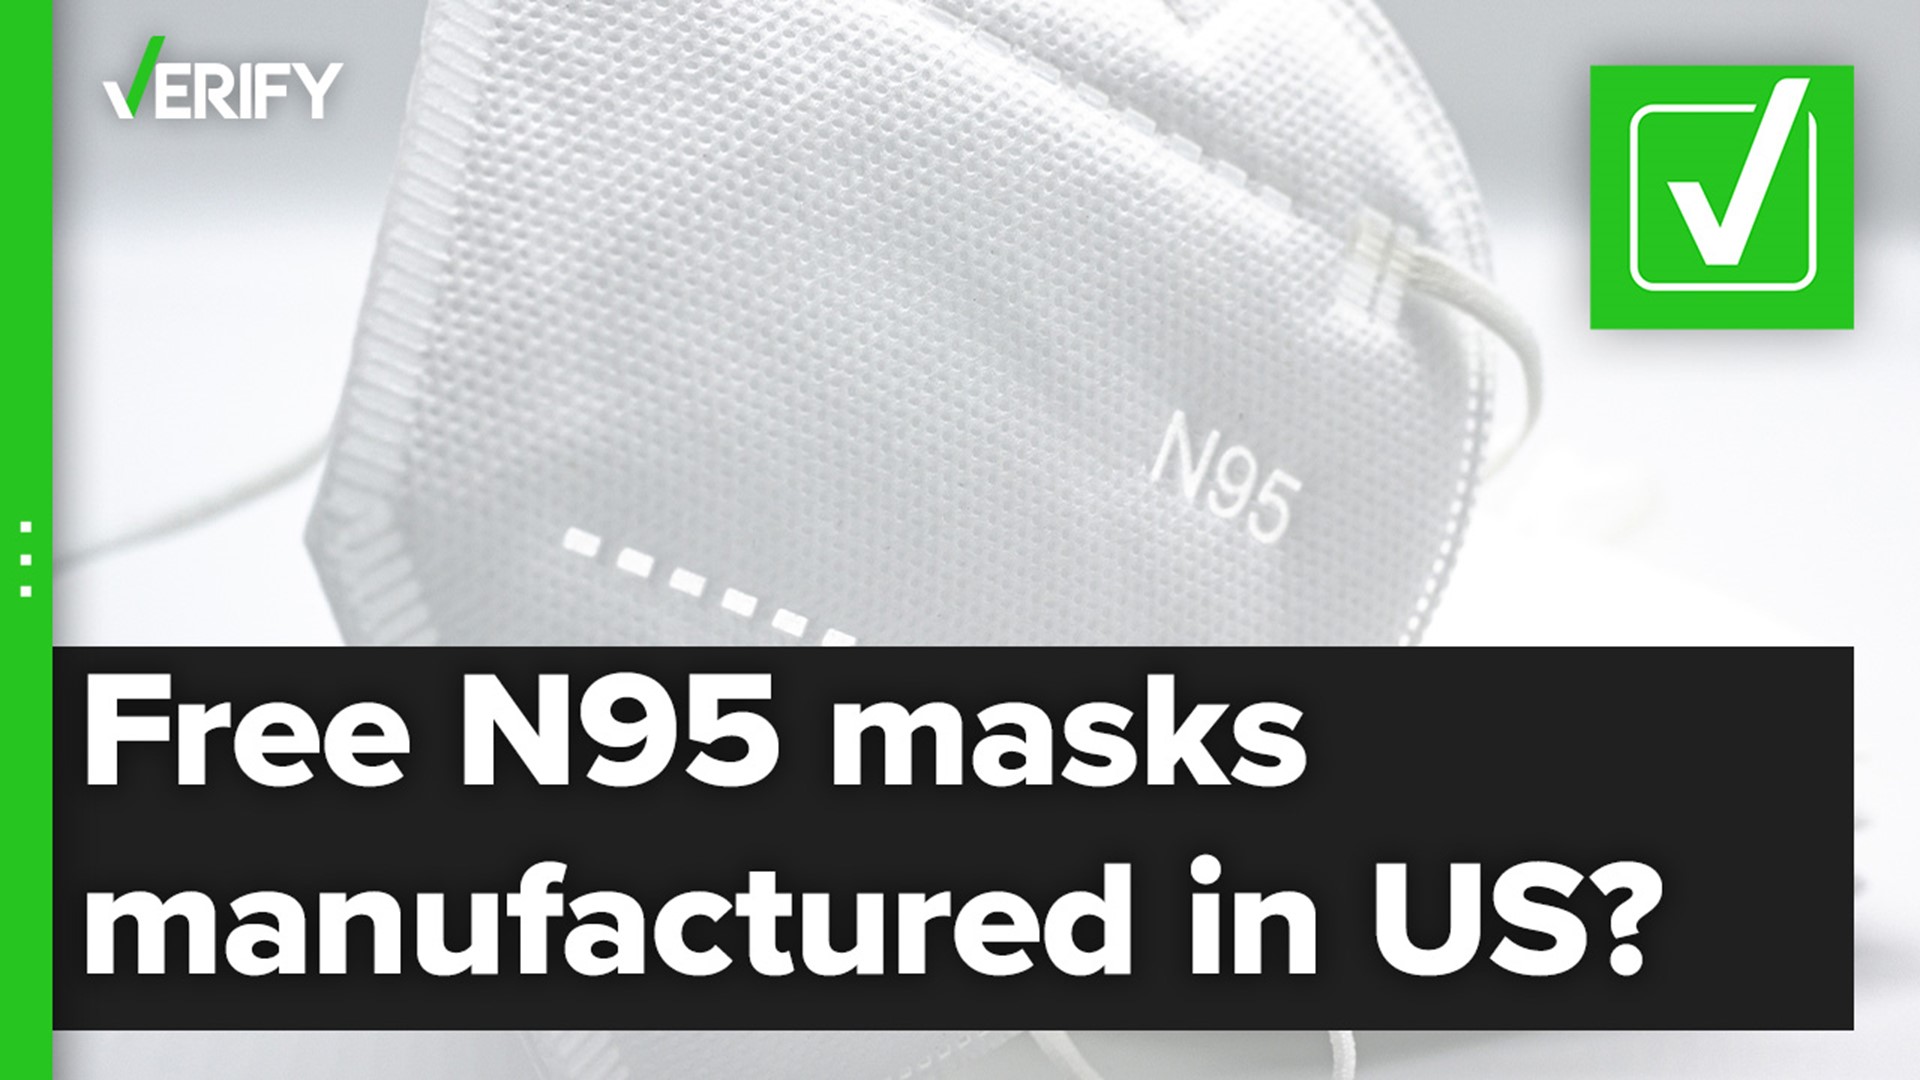 NIOSH-approved N95 masks deployed from the federal government’s stockpile were manufactured in the United States.